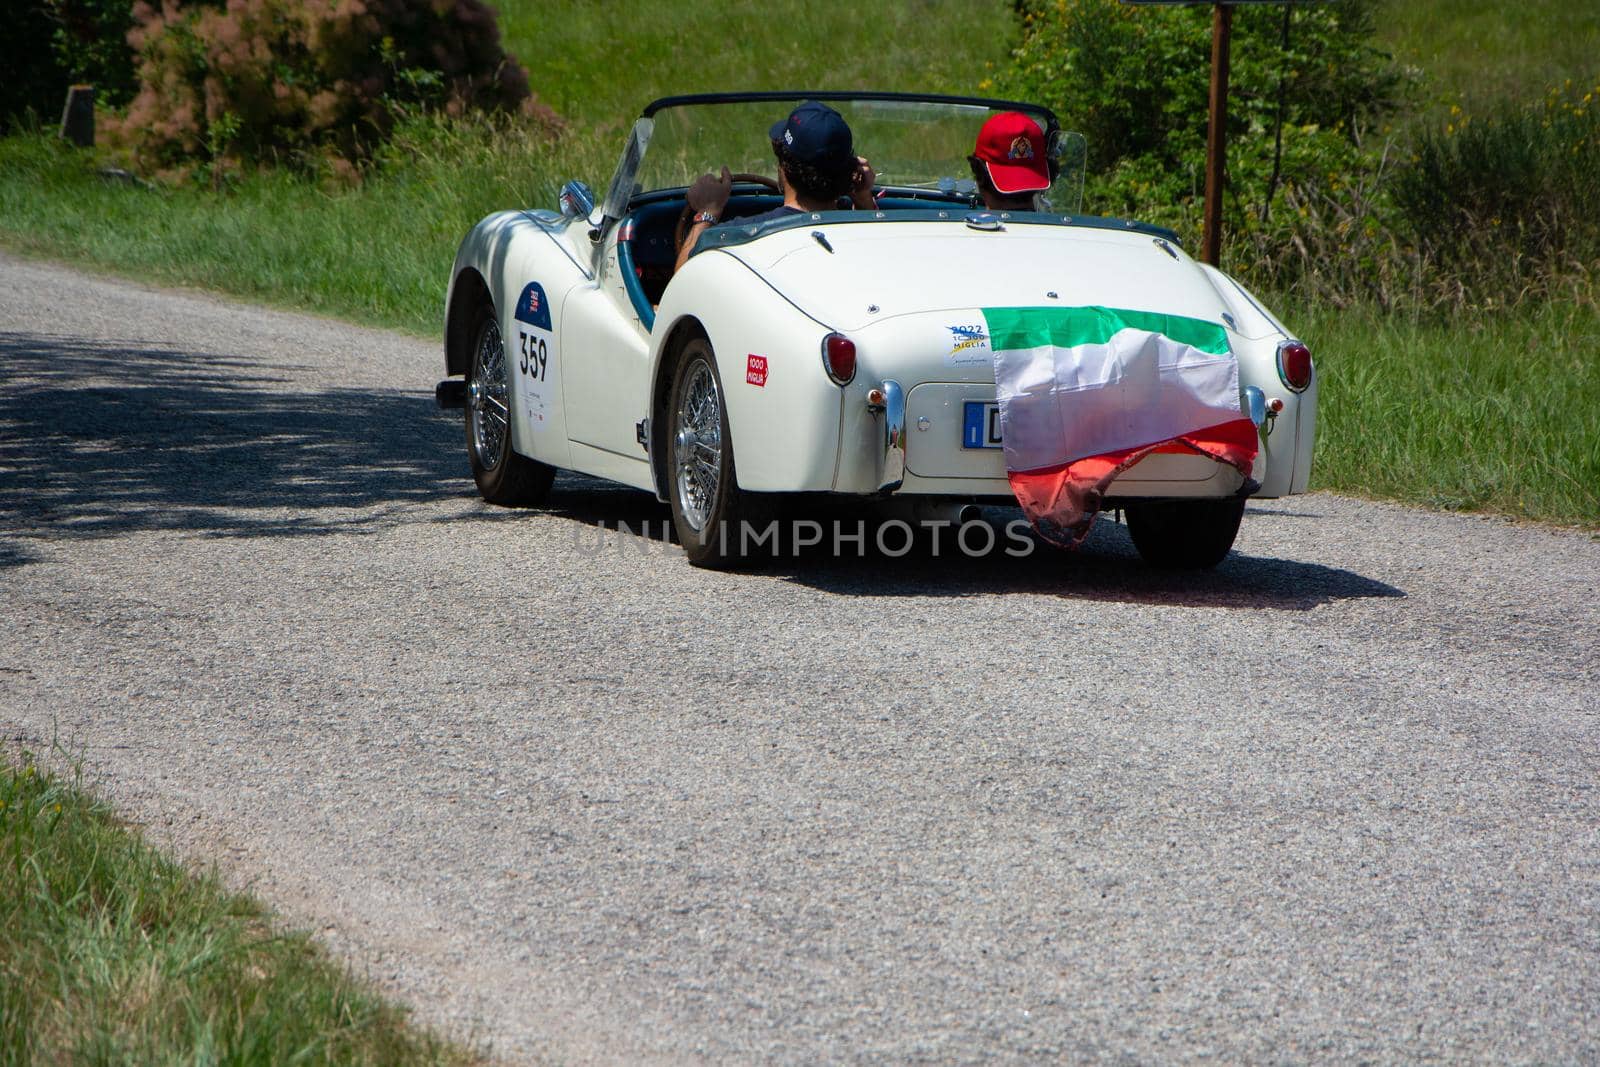 URBINO - ITALY - JUN 16 - 2022 : TRIUMPH TR3 SPORTS 1956 on an old racing car in rally Mille Miglia 2022 the famous italian historical race (1927-1957